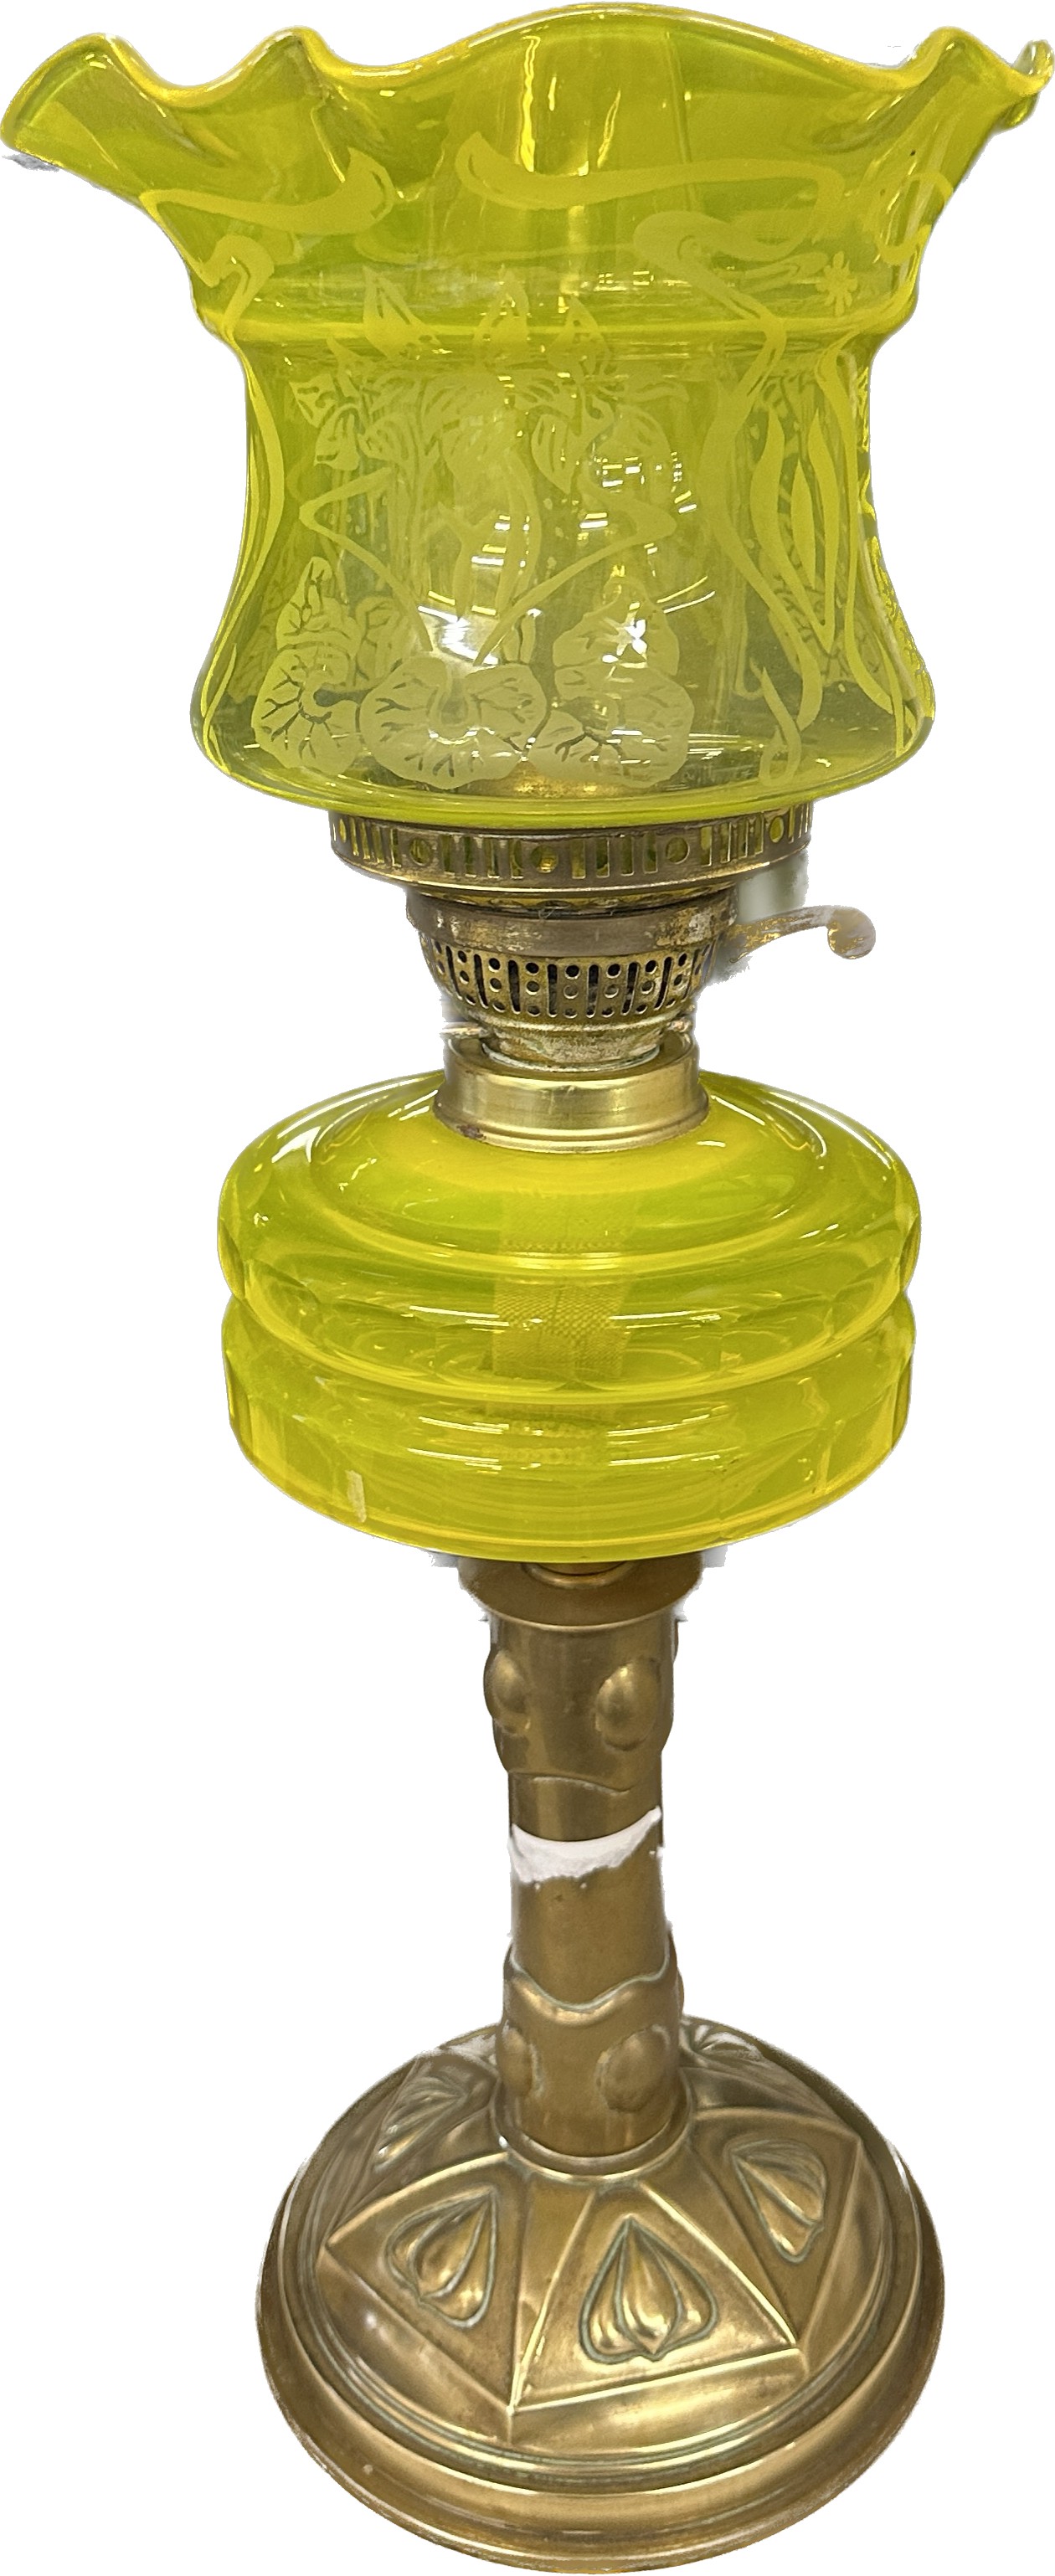 Antique brass bass yellow glass oil lamp complete with funnel and shade - Image 3 of 4